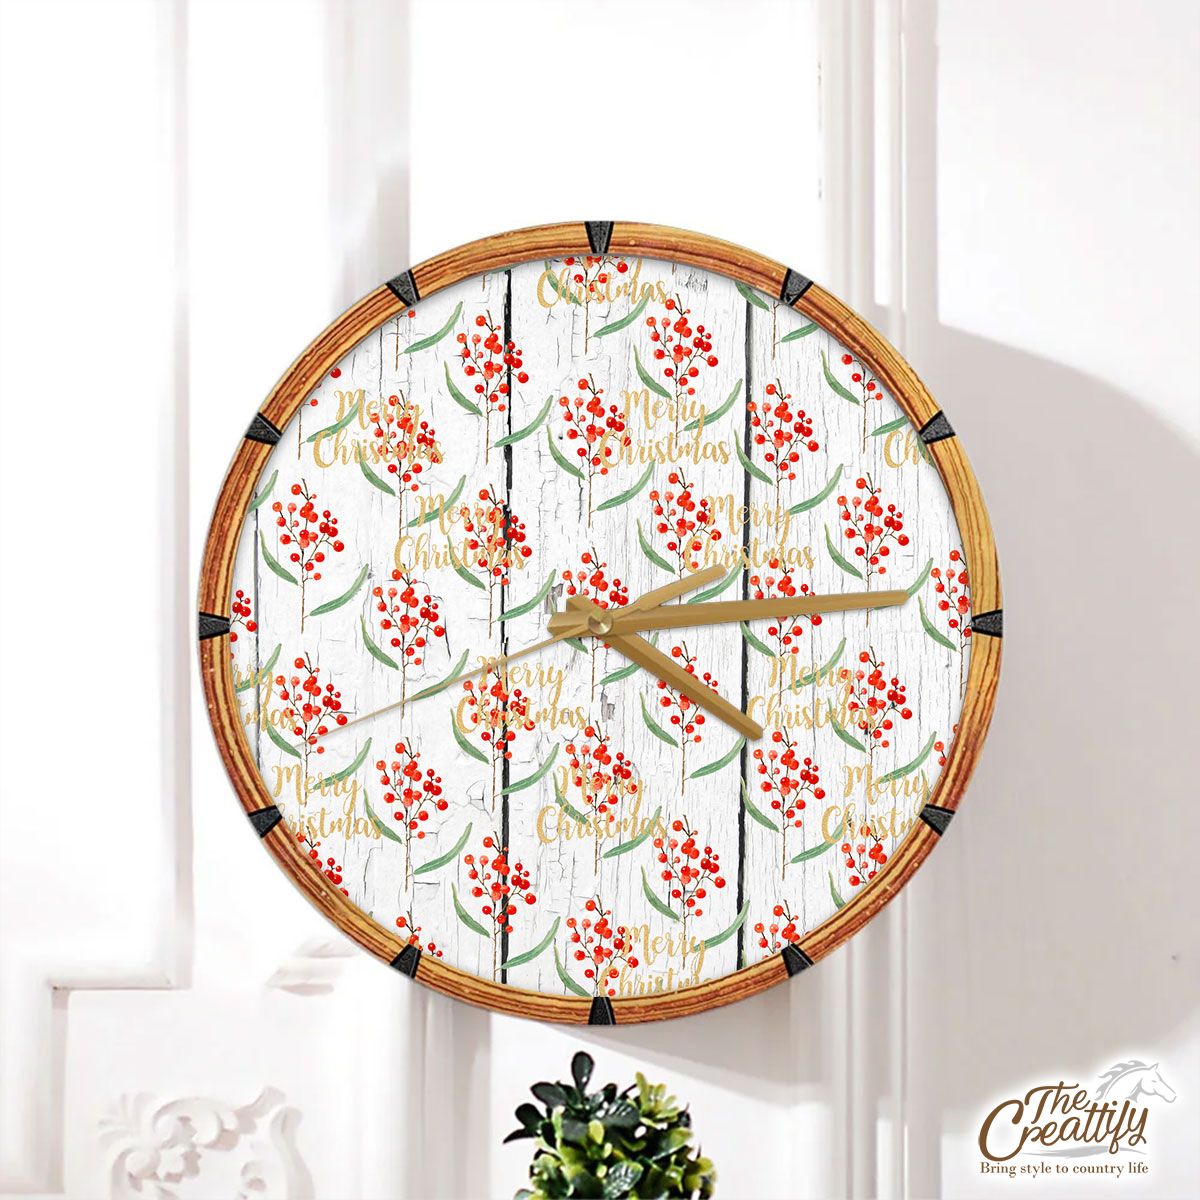 Red Berries With Merry Christmas Wishes Wall Clock